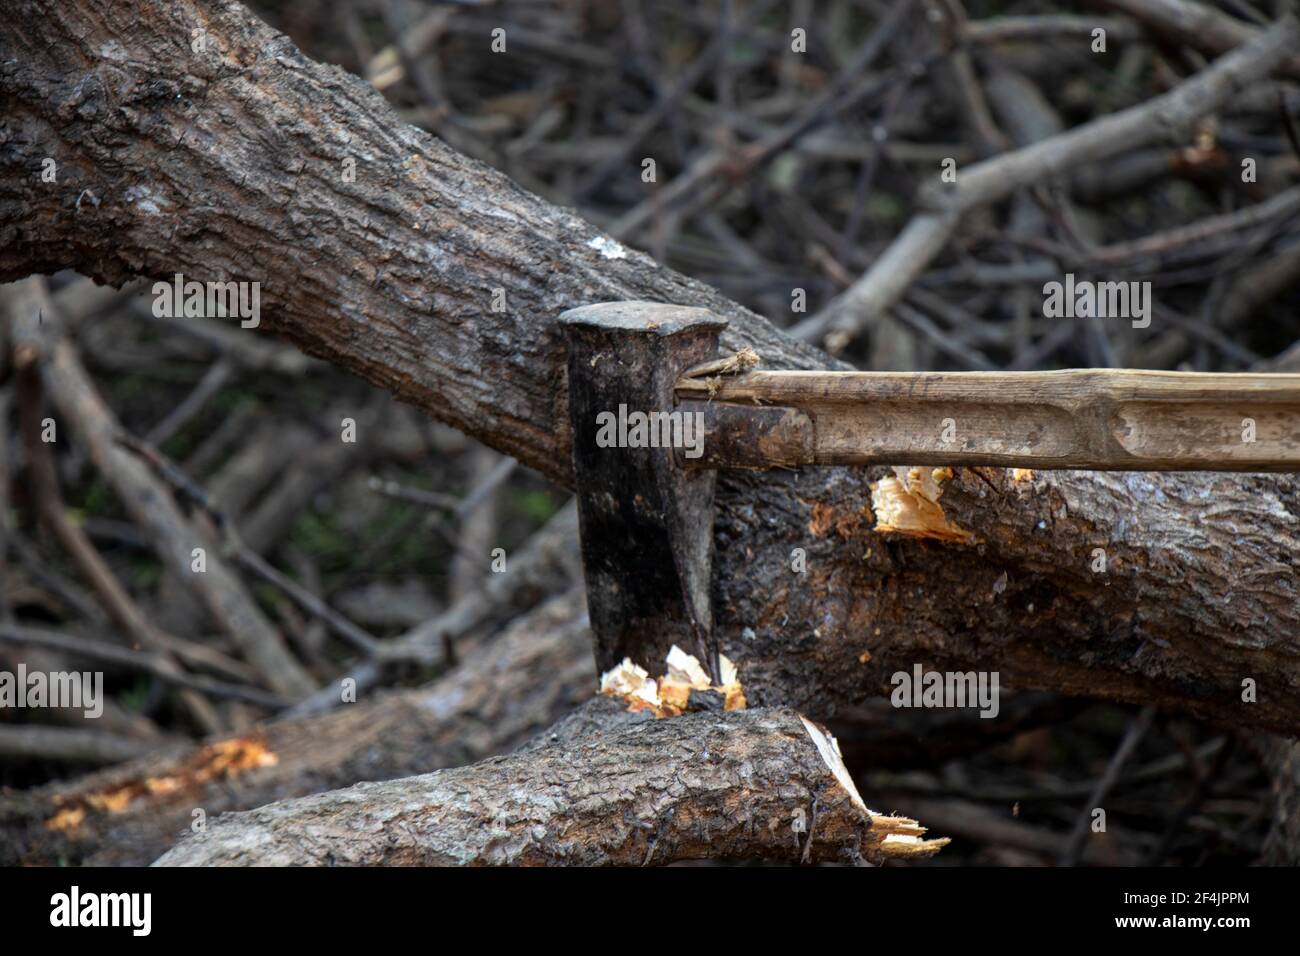 Close-up of woodcutter axe in motion, bring down trees concept Stock Photo